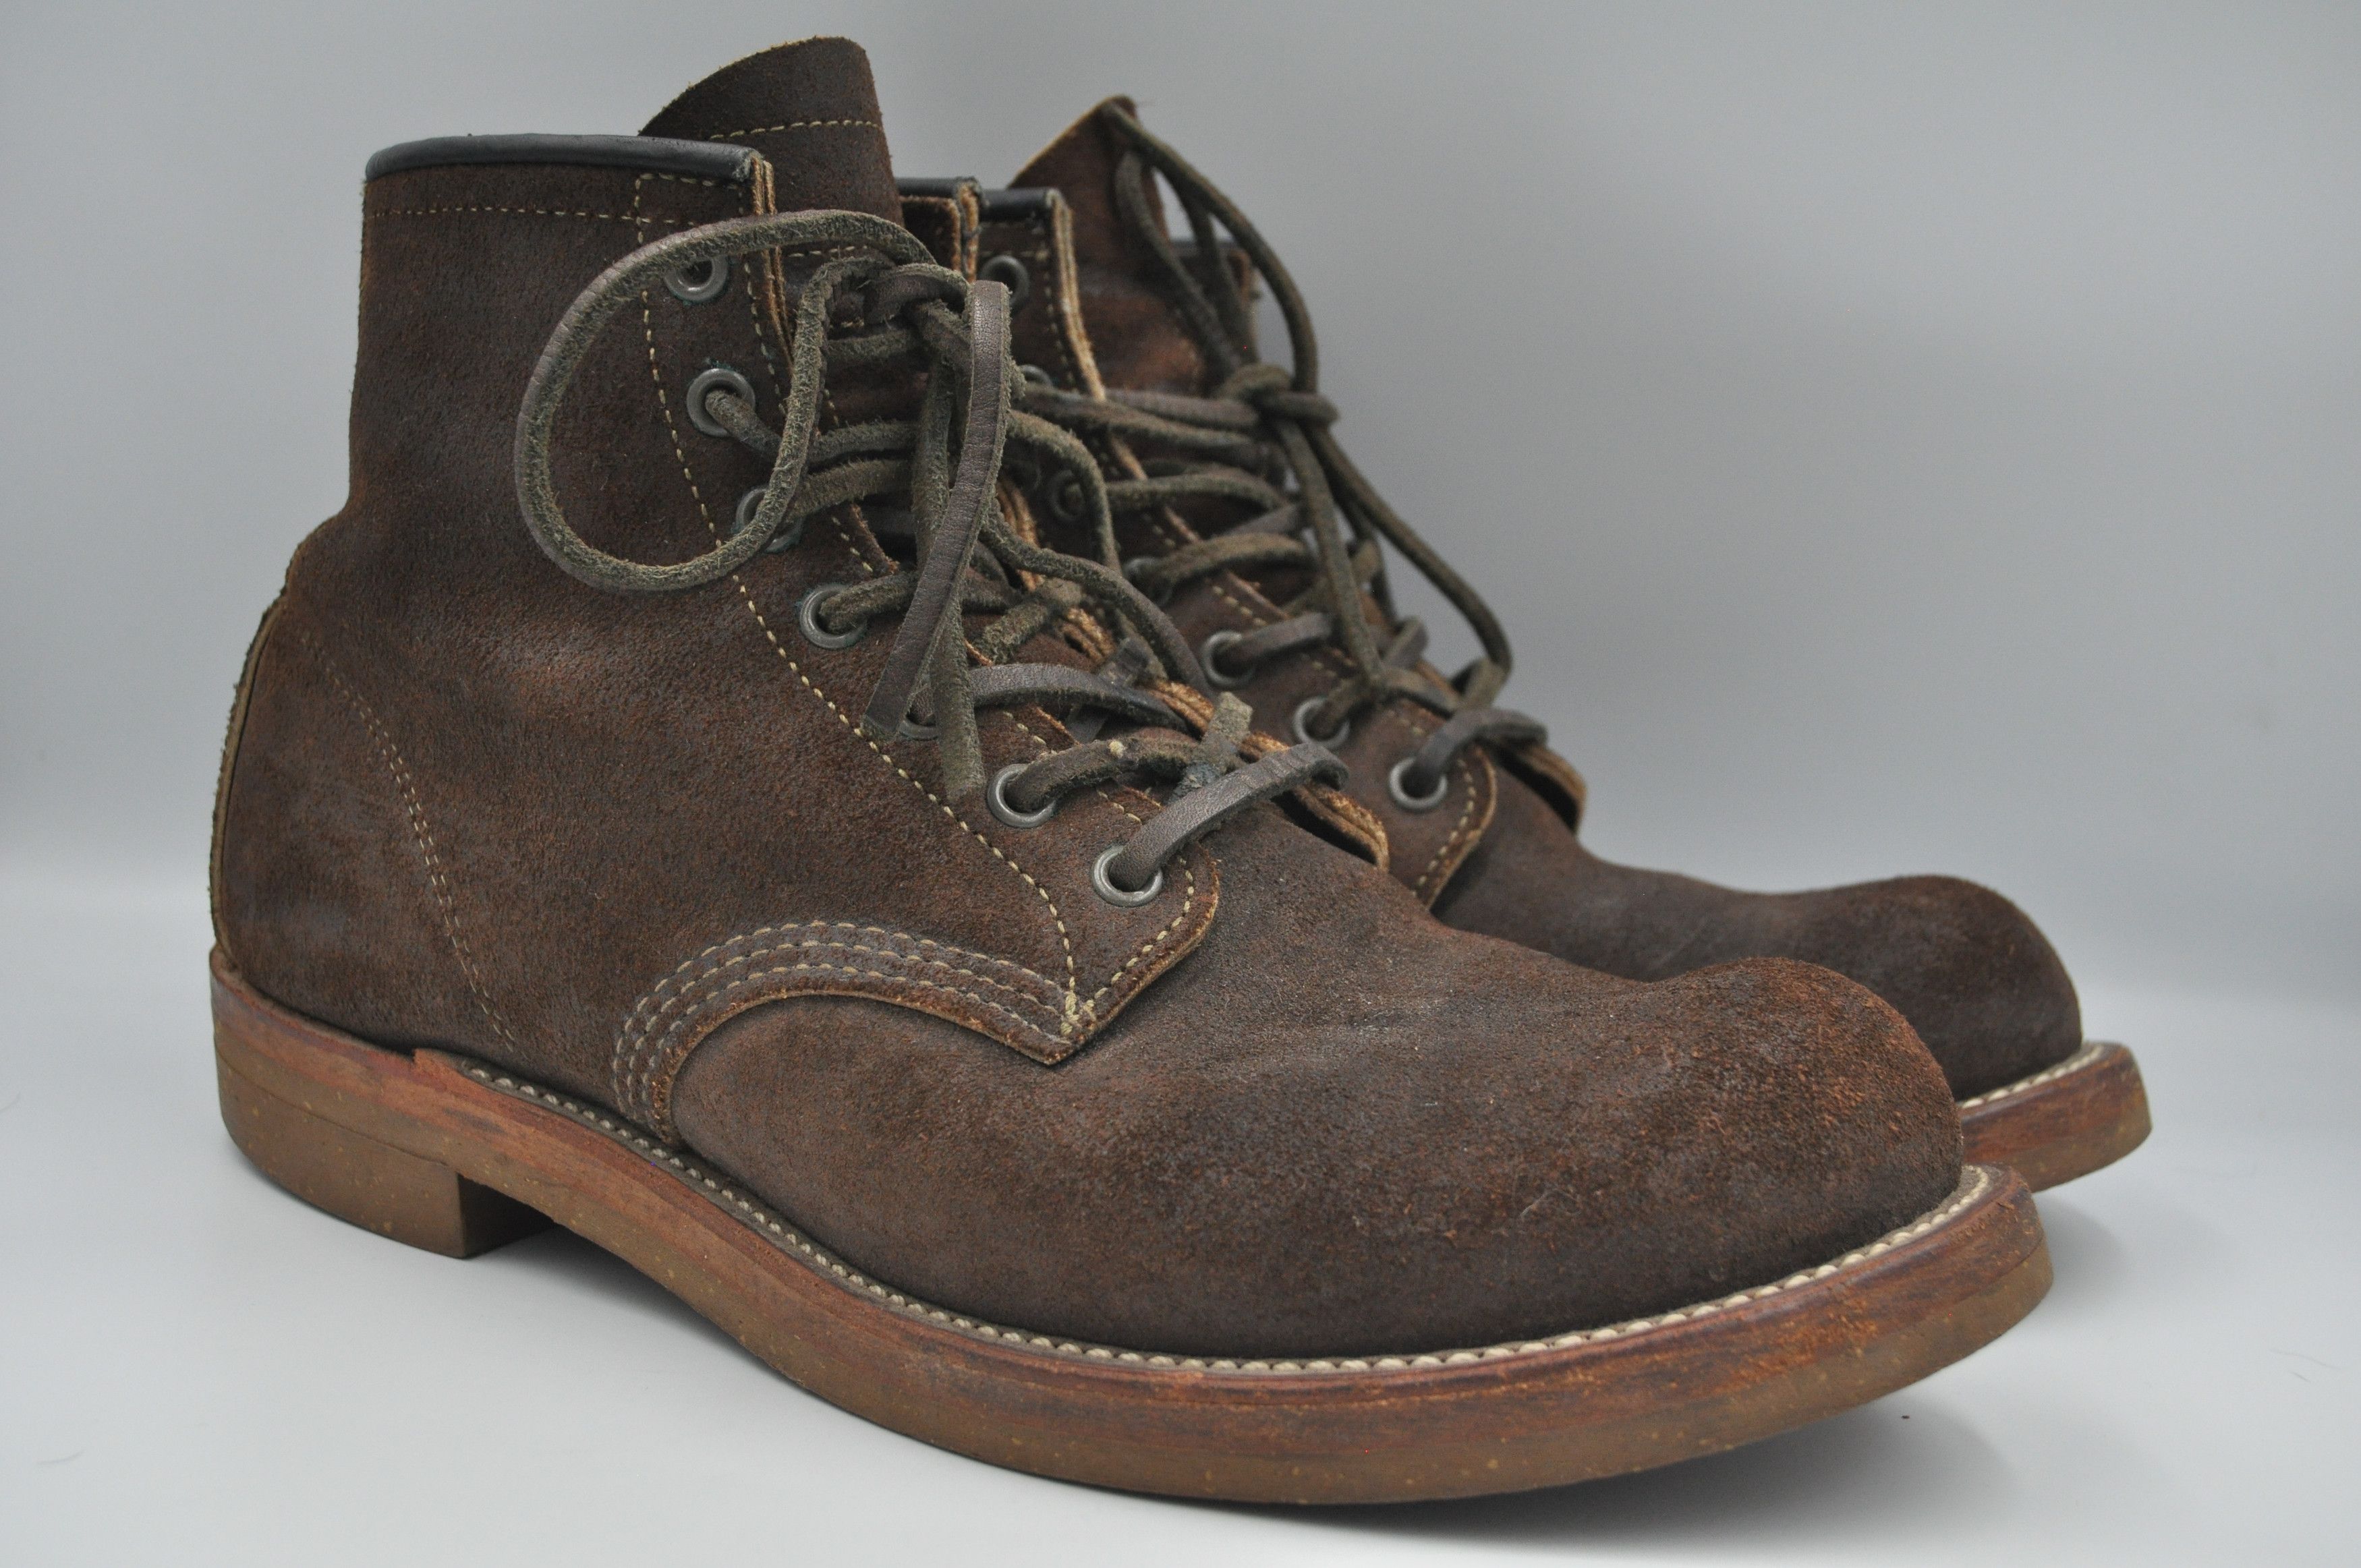 RED WING 4618 Nigel Cabourn - ブーツ